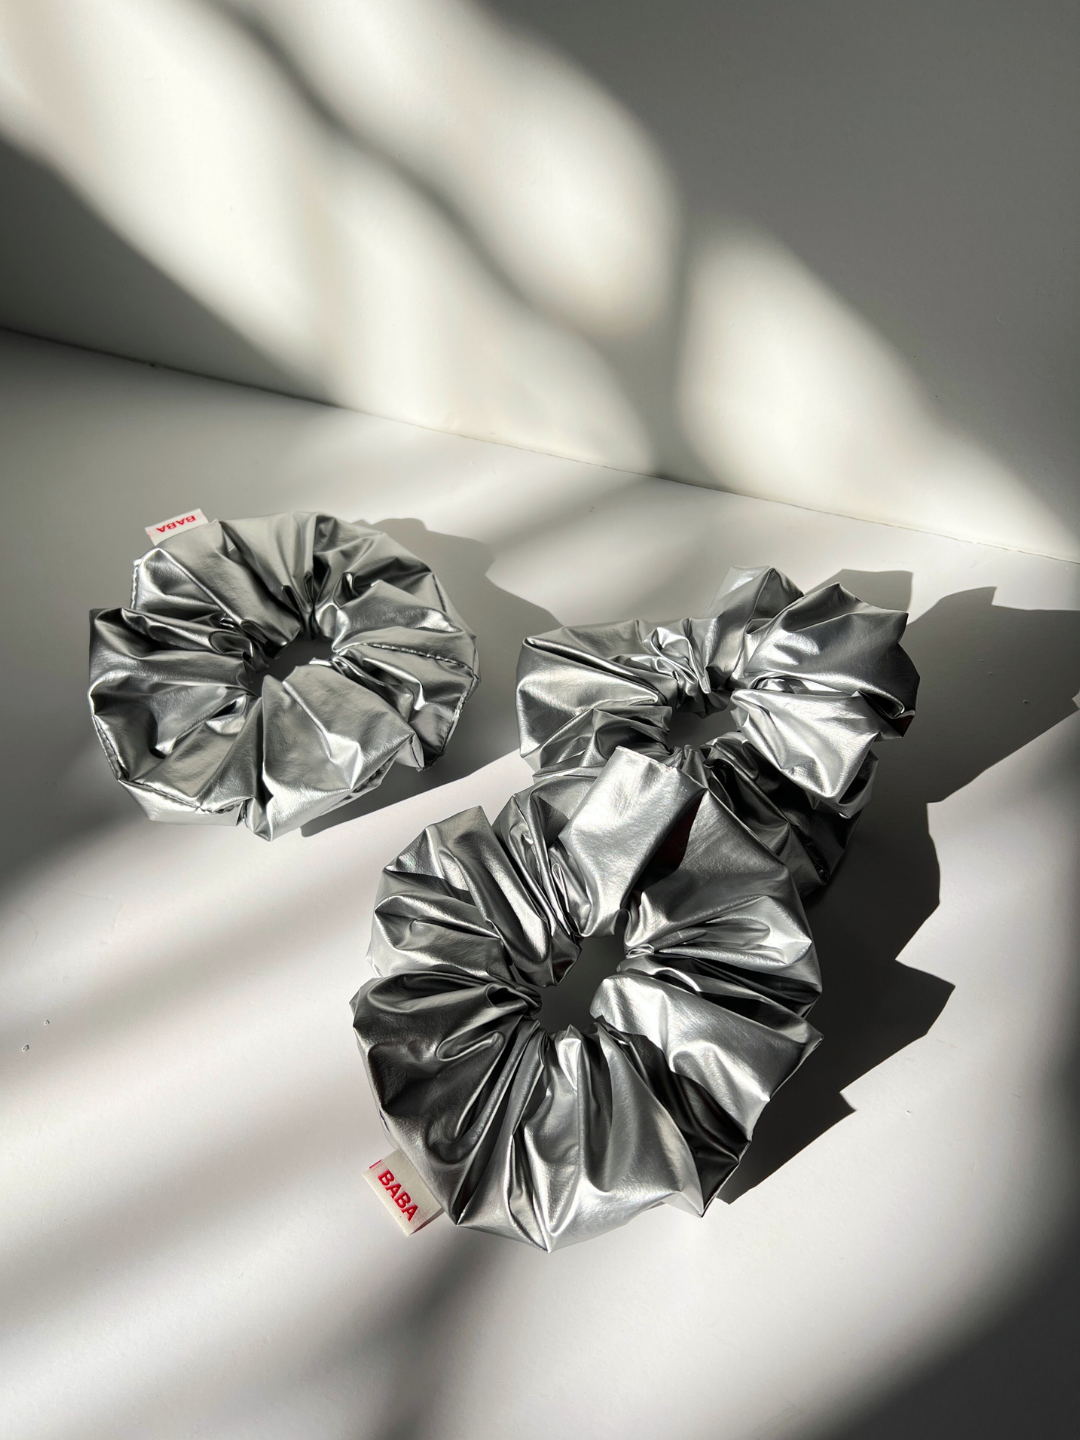 Three silver metallic scrunchies with red "Baba" logo tag on the side, lying on a white backdrop with shadows from a window..